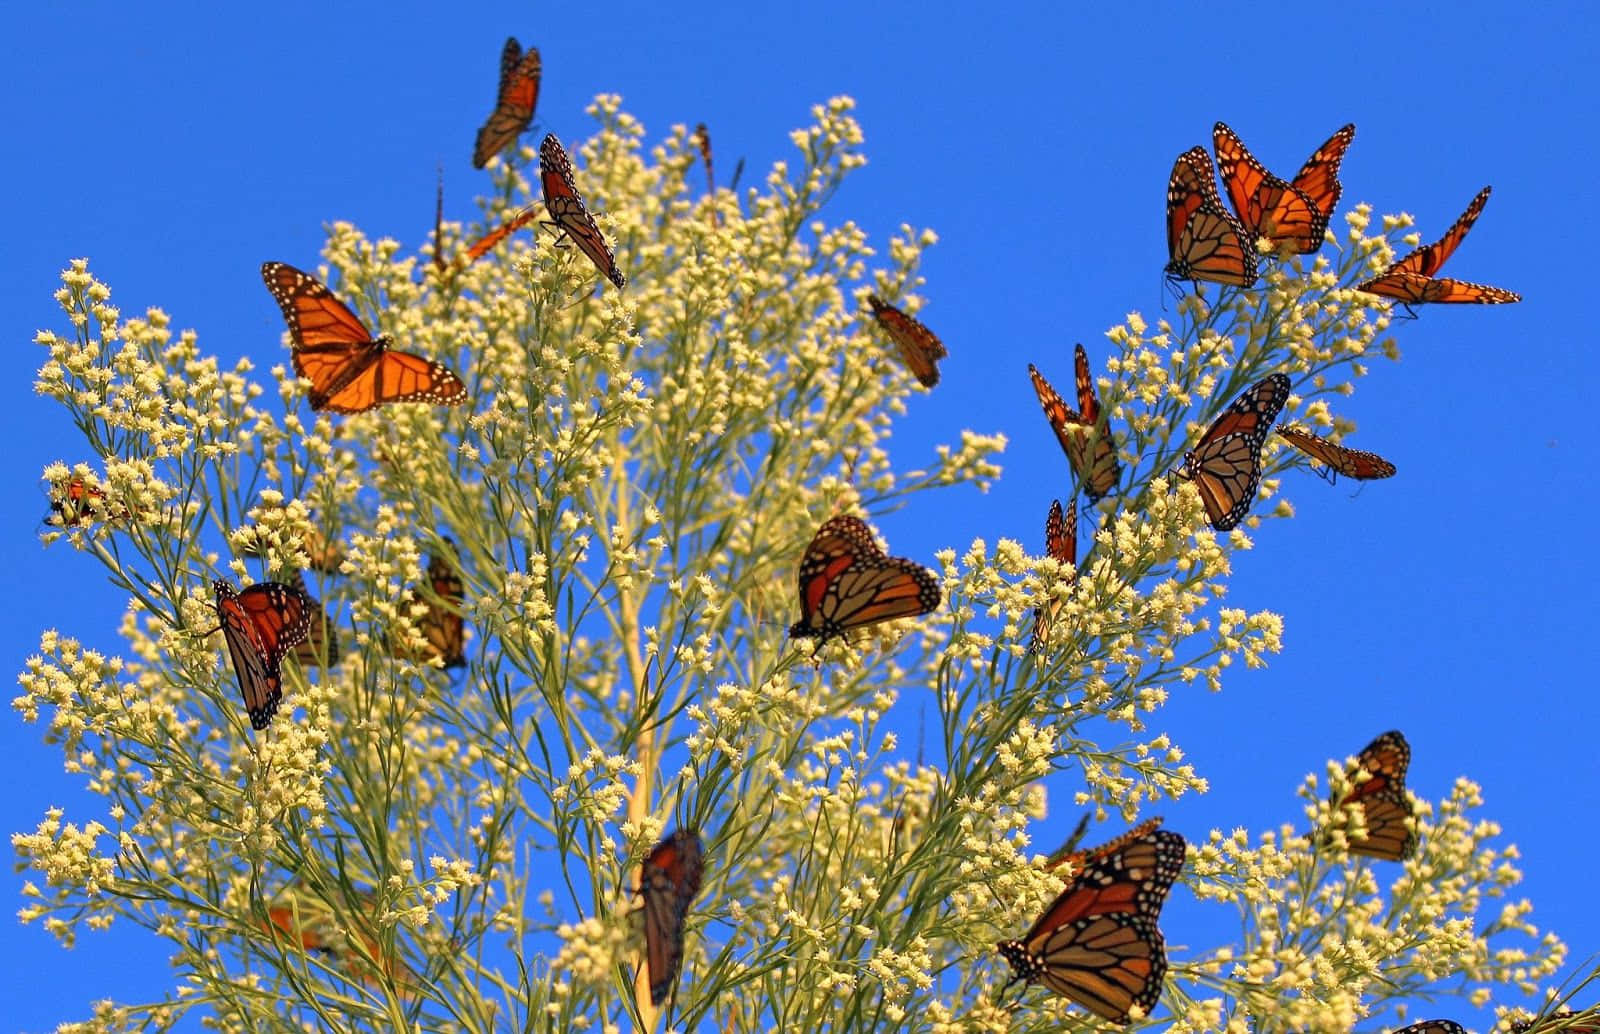 A Monarch Butterfly is a beautiful, colorful creature that flutters throughout our world.